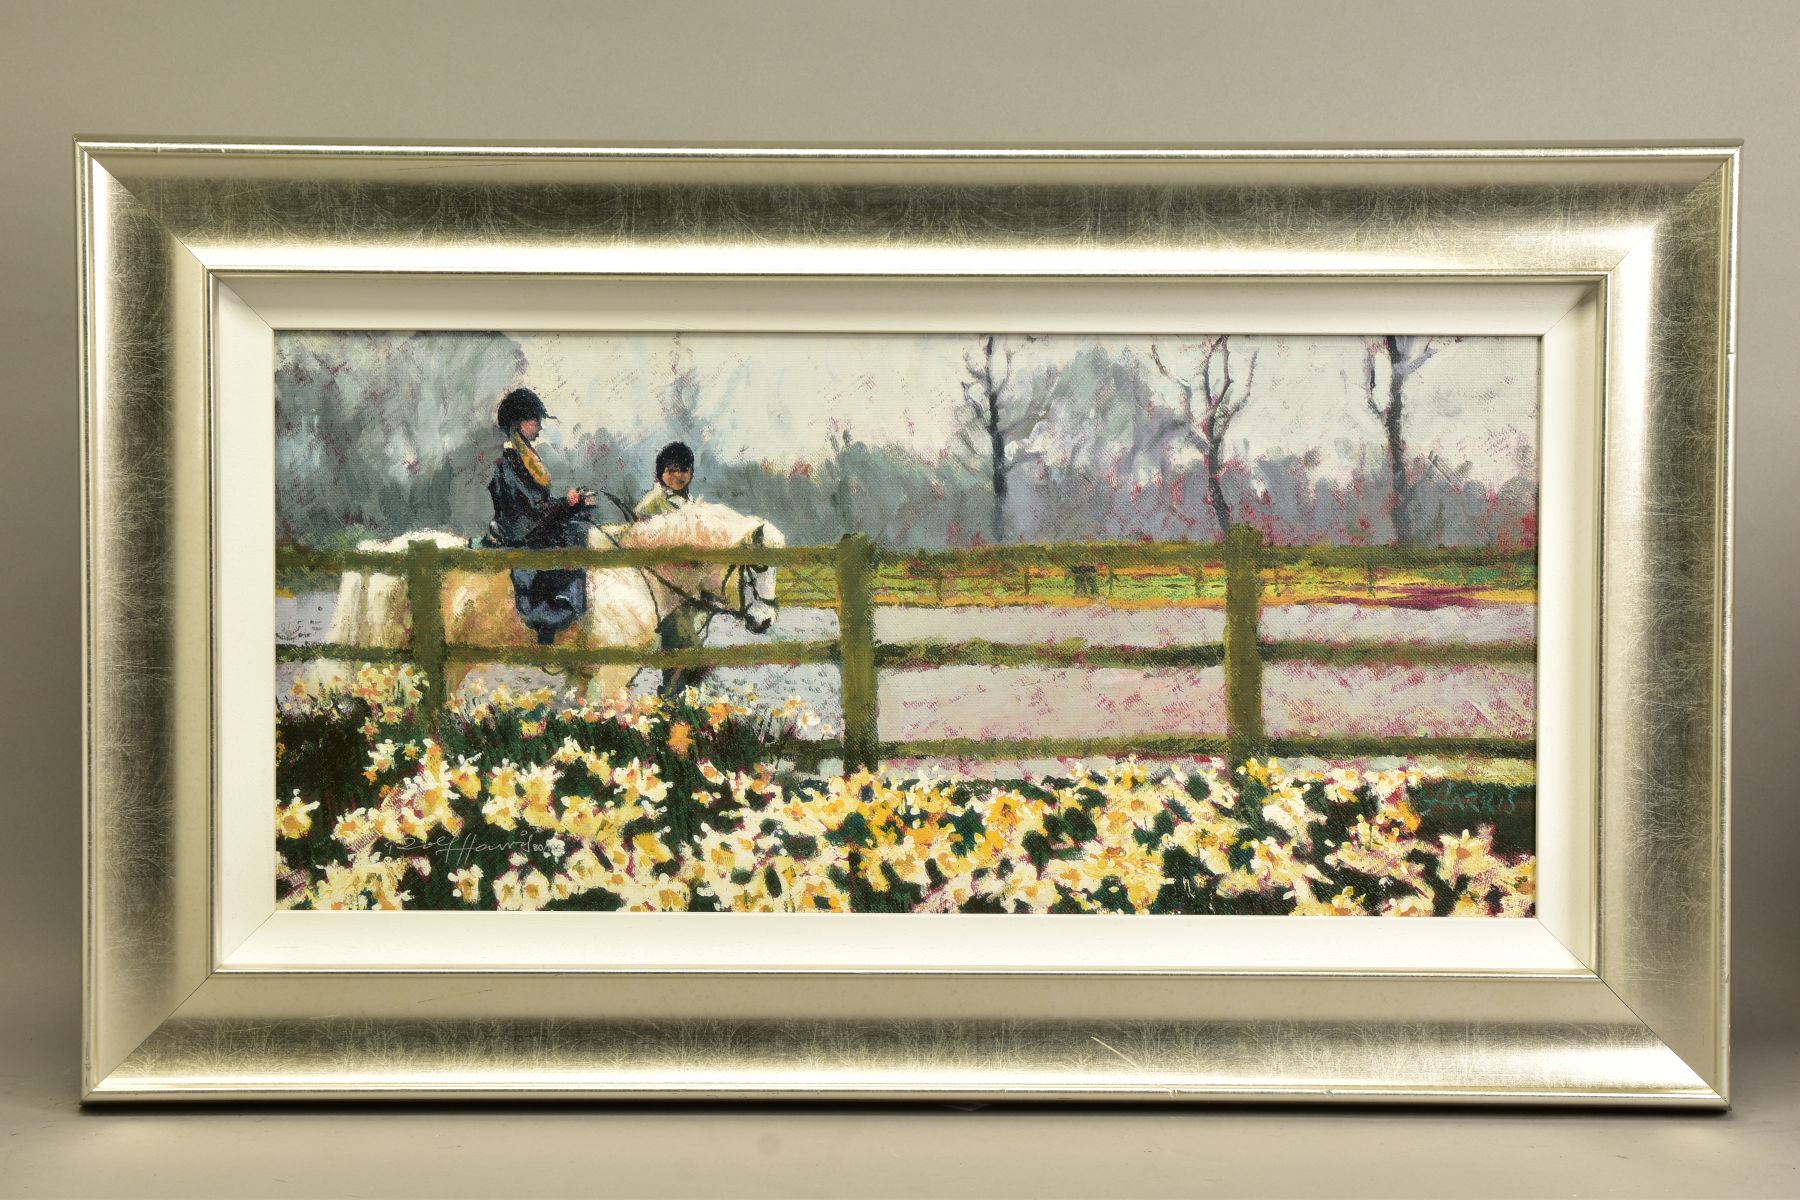 ROLF HARRIS (AUSTRALIAN 1930), 'RIDING IN THE SPRING', a limited edition print of a child riding a